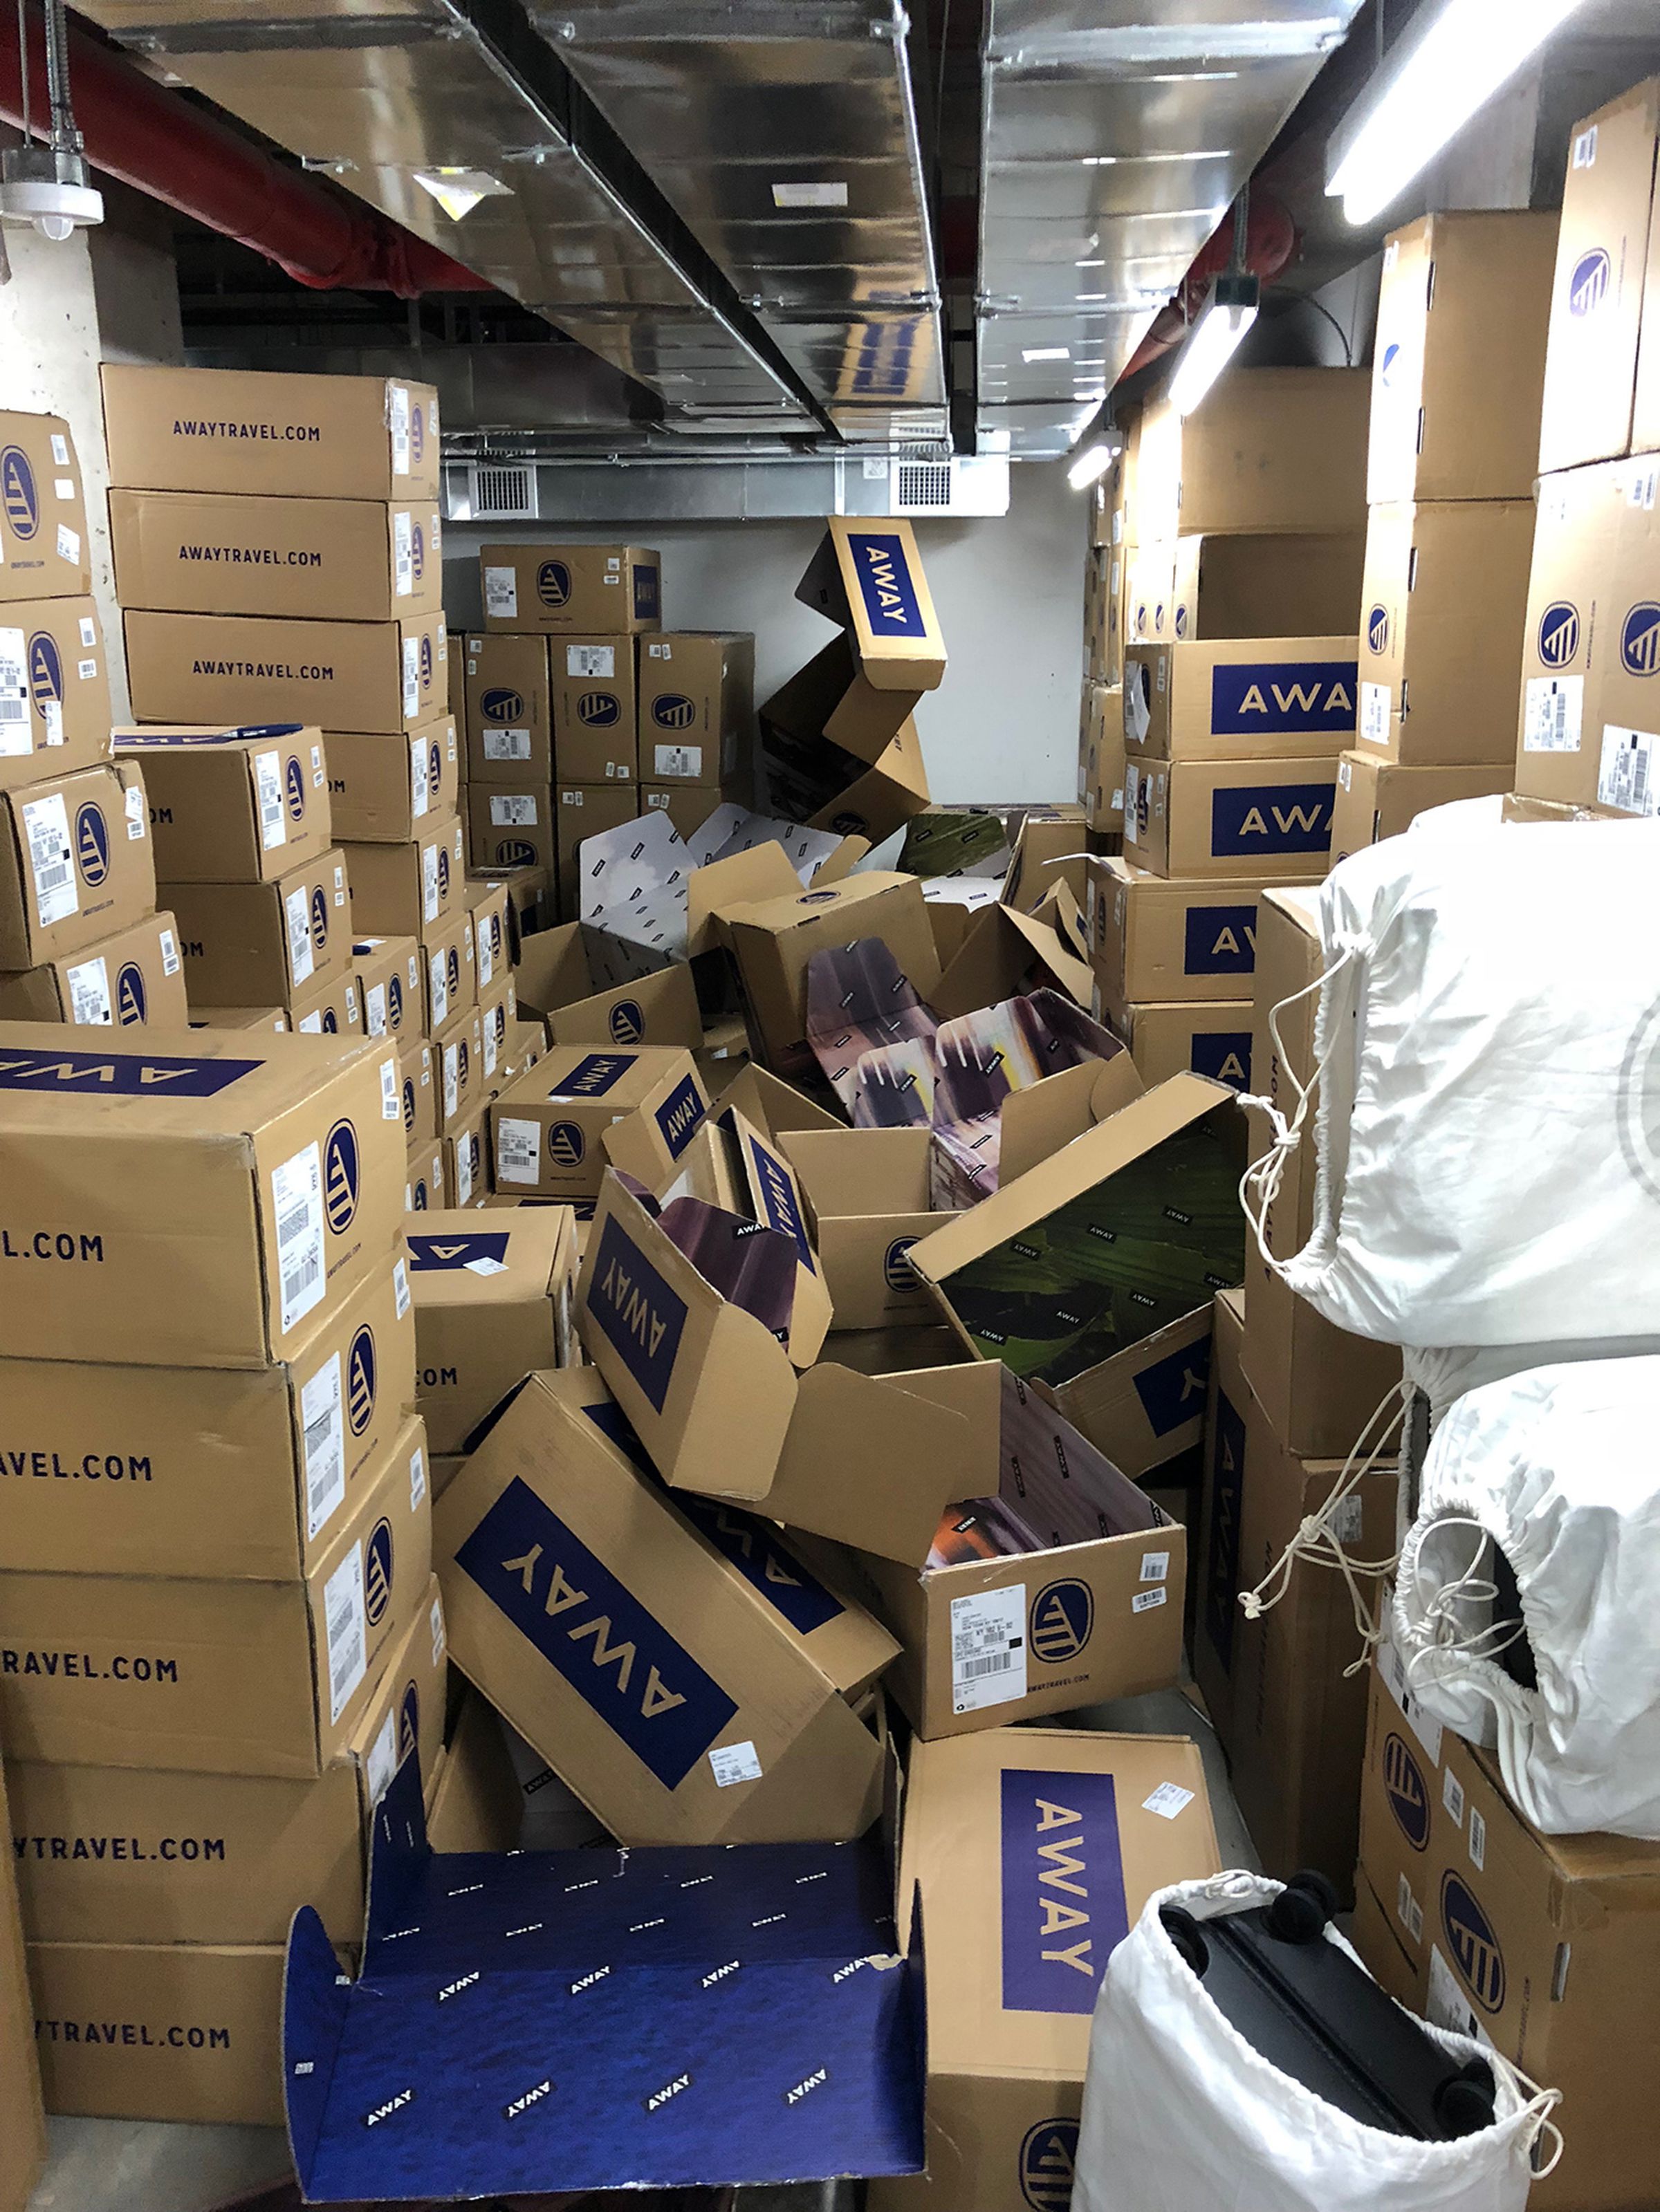 At one point, stacks of cardboard boxes at Away’s retail store in Manhattan nearly reached the ceiling.